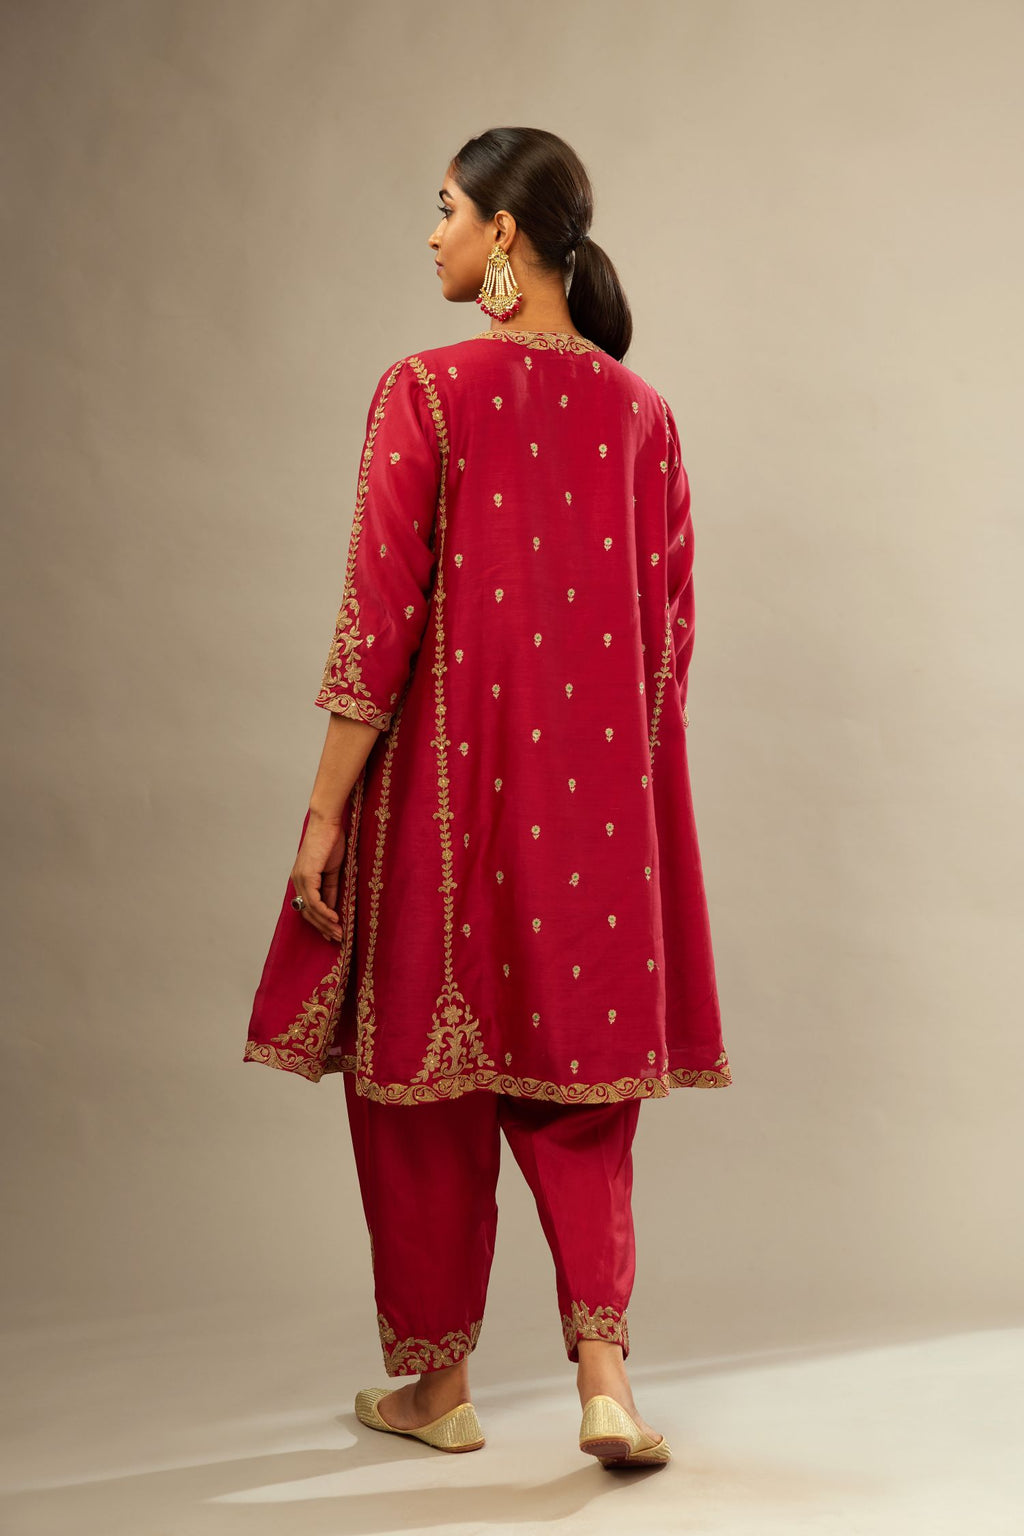 Fuchsia silk chanderi short kalidar kurta set with all-over delicate zari bootis, detailed with dori embroidery and gold sequin work.